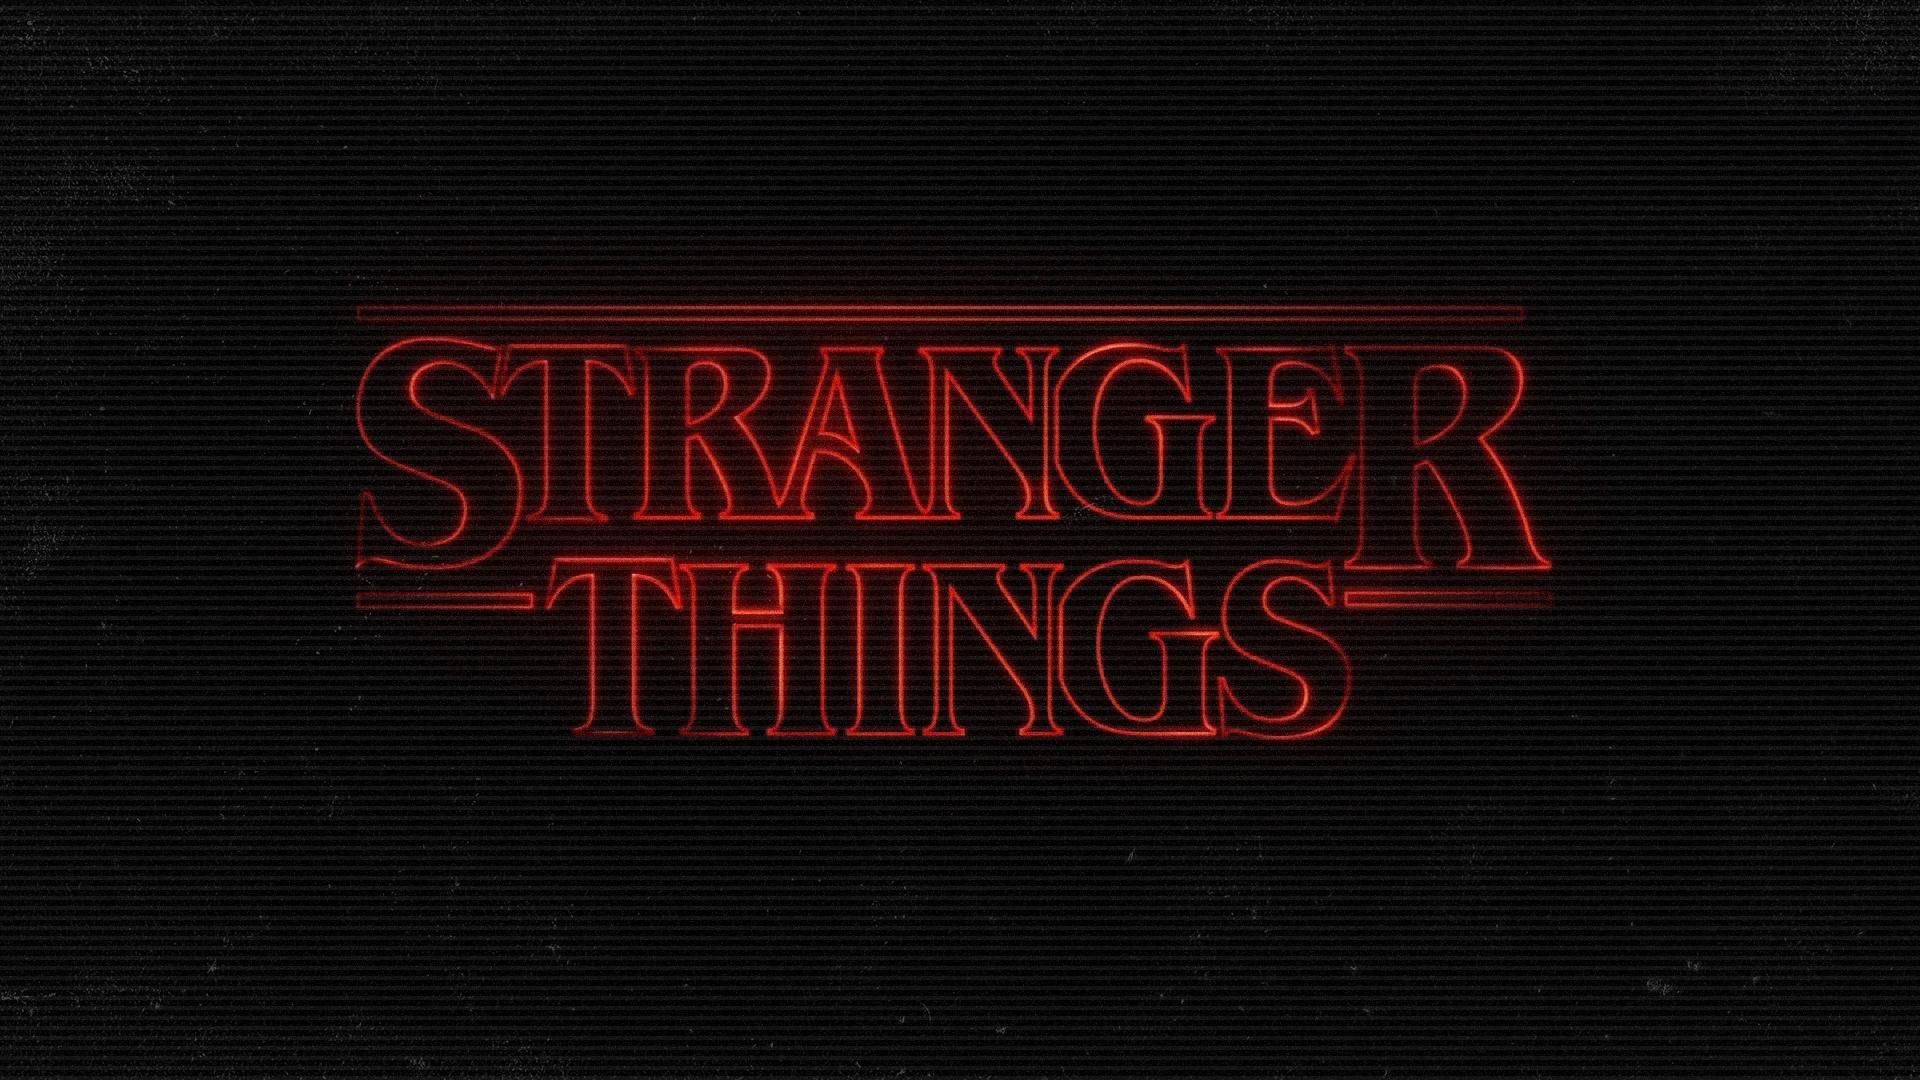 Stranger Things wallpaper with the title in red - Stranger Things